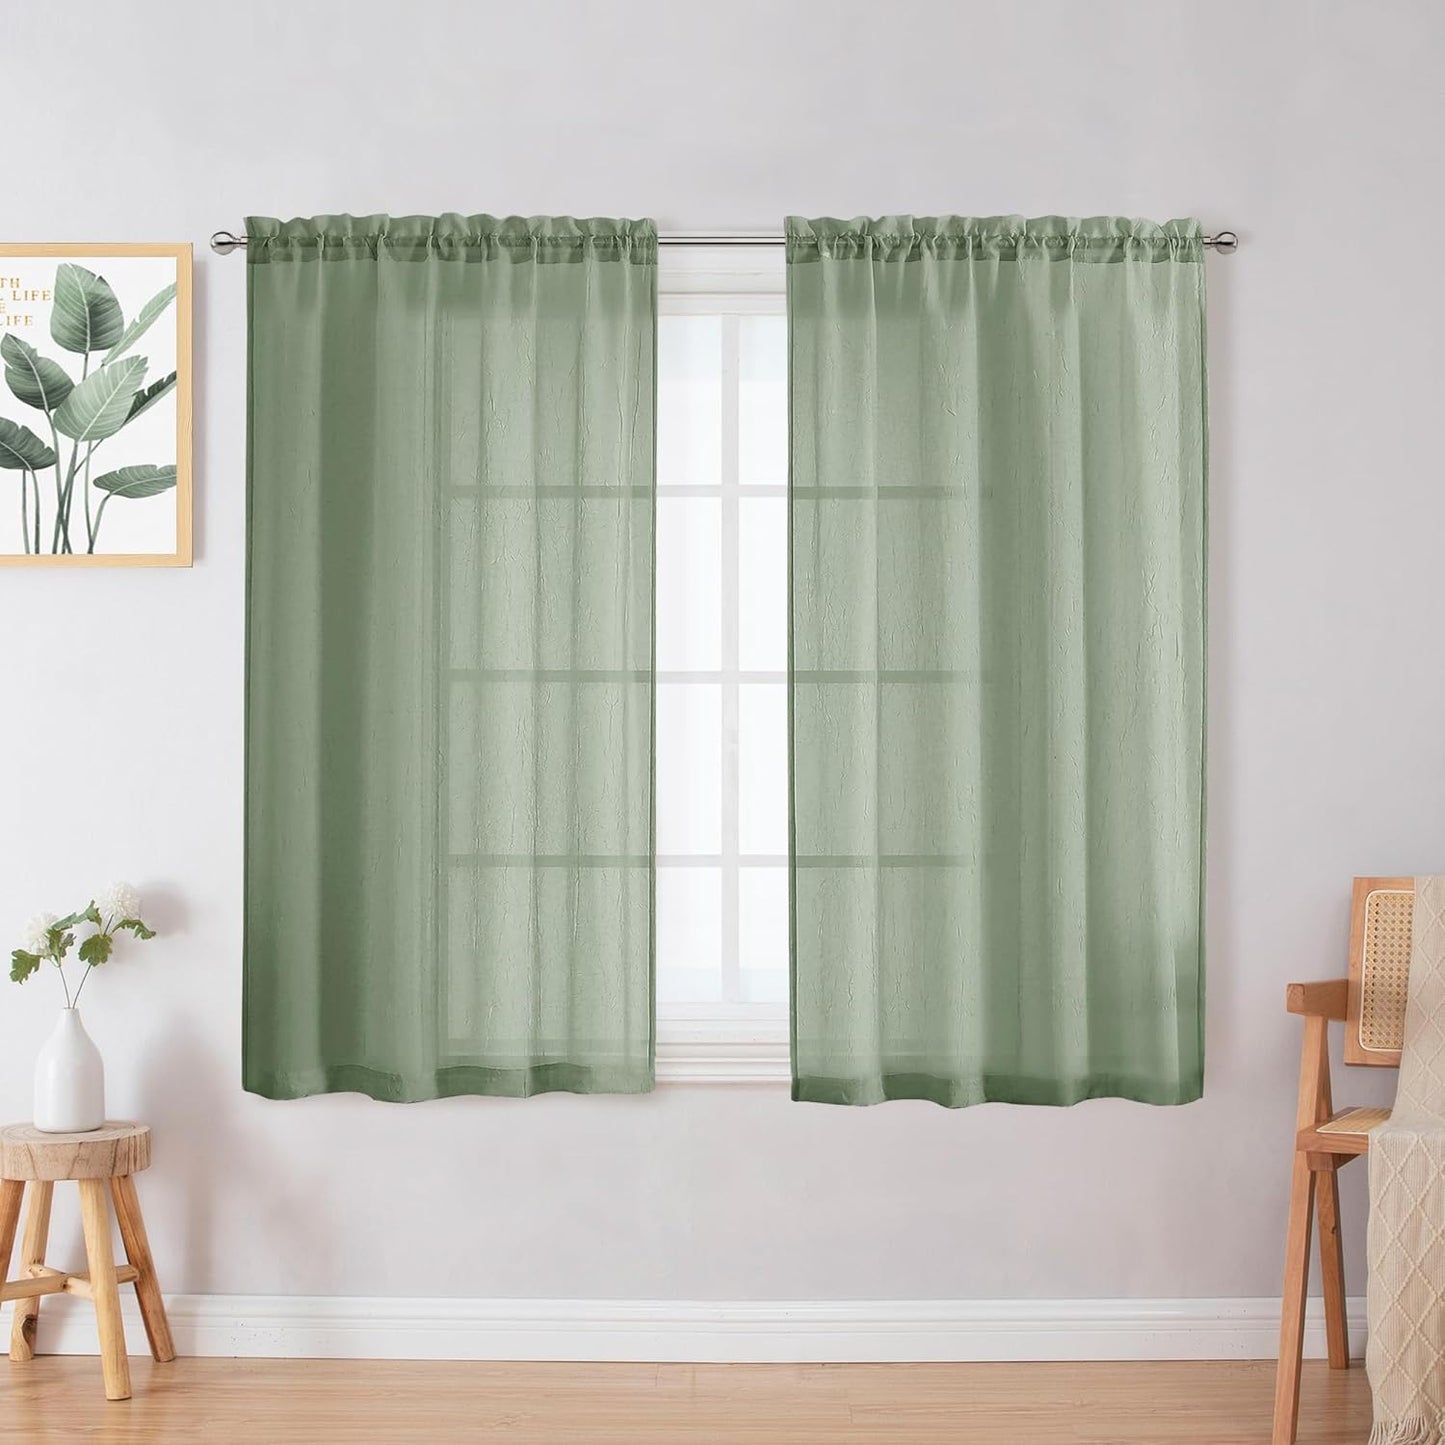 Chyhomenyc Crushed White Sheer Valances for Window 14 Inch Length 2 PCS, Crinkle Voile Short Kitchen Curtains with Dual Rod Pockets，Gauzy Bedroom Curtain Valance，Each 42Wx14L Inches  Chyhomenyc Sage Green 42 W X 45 L 